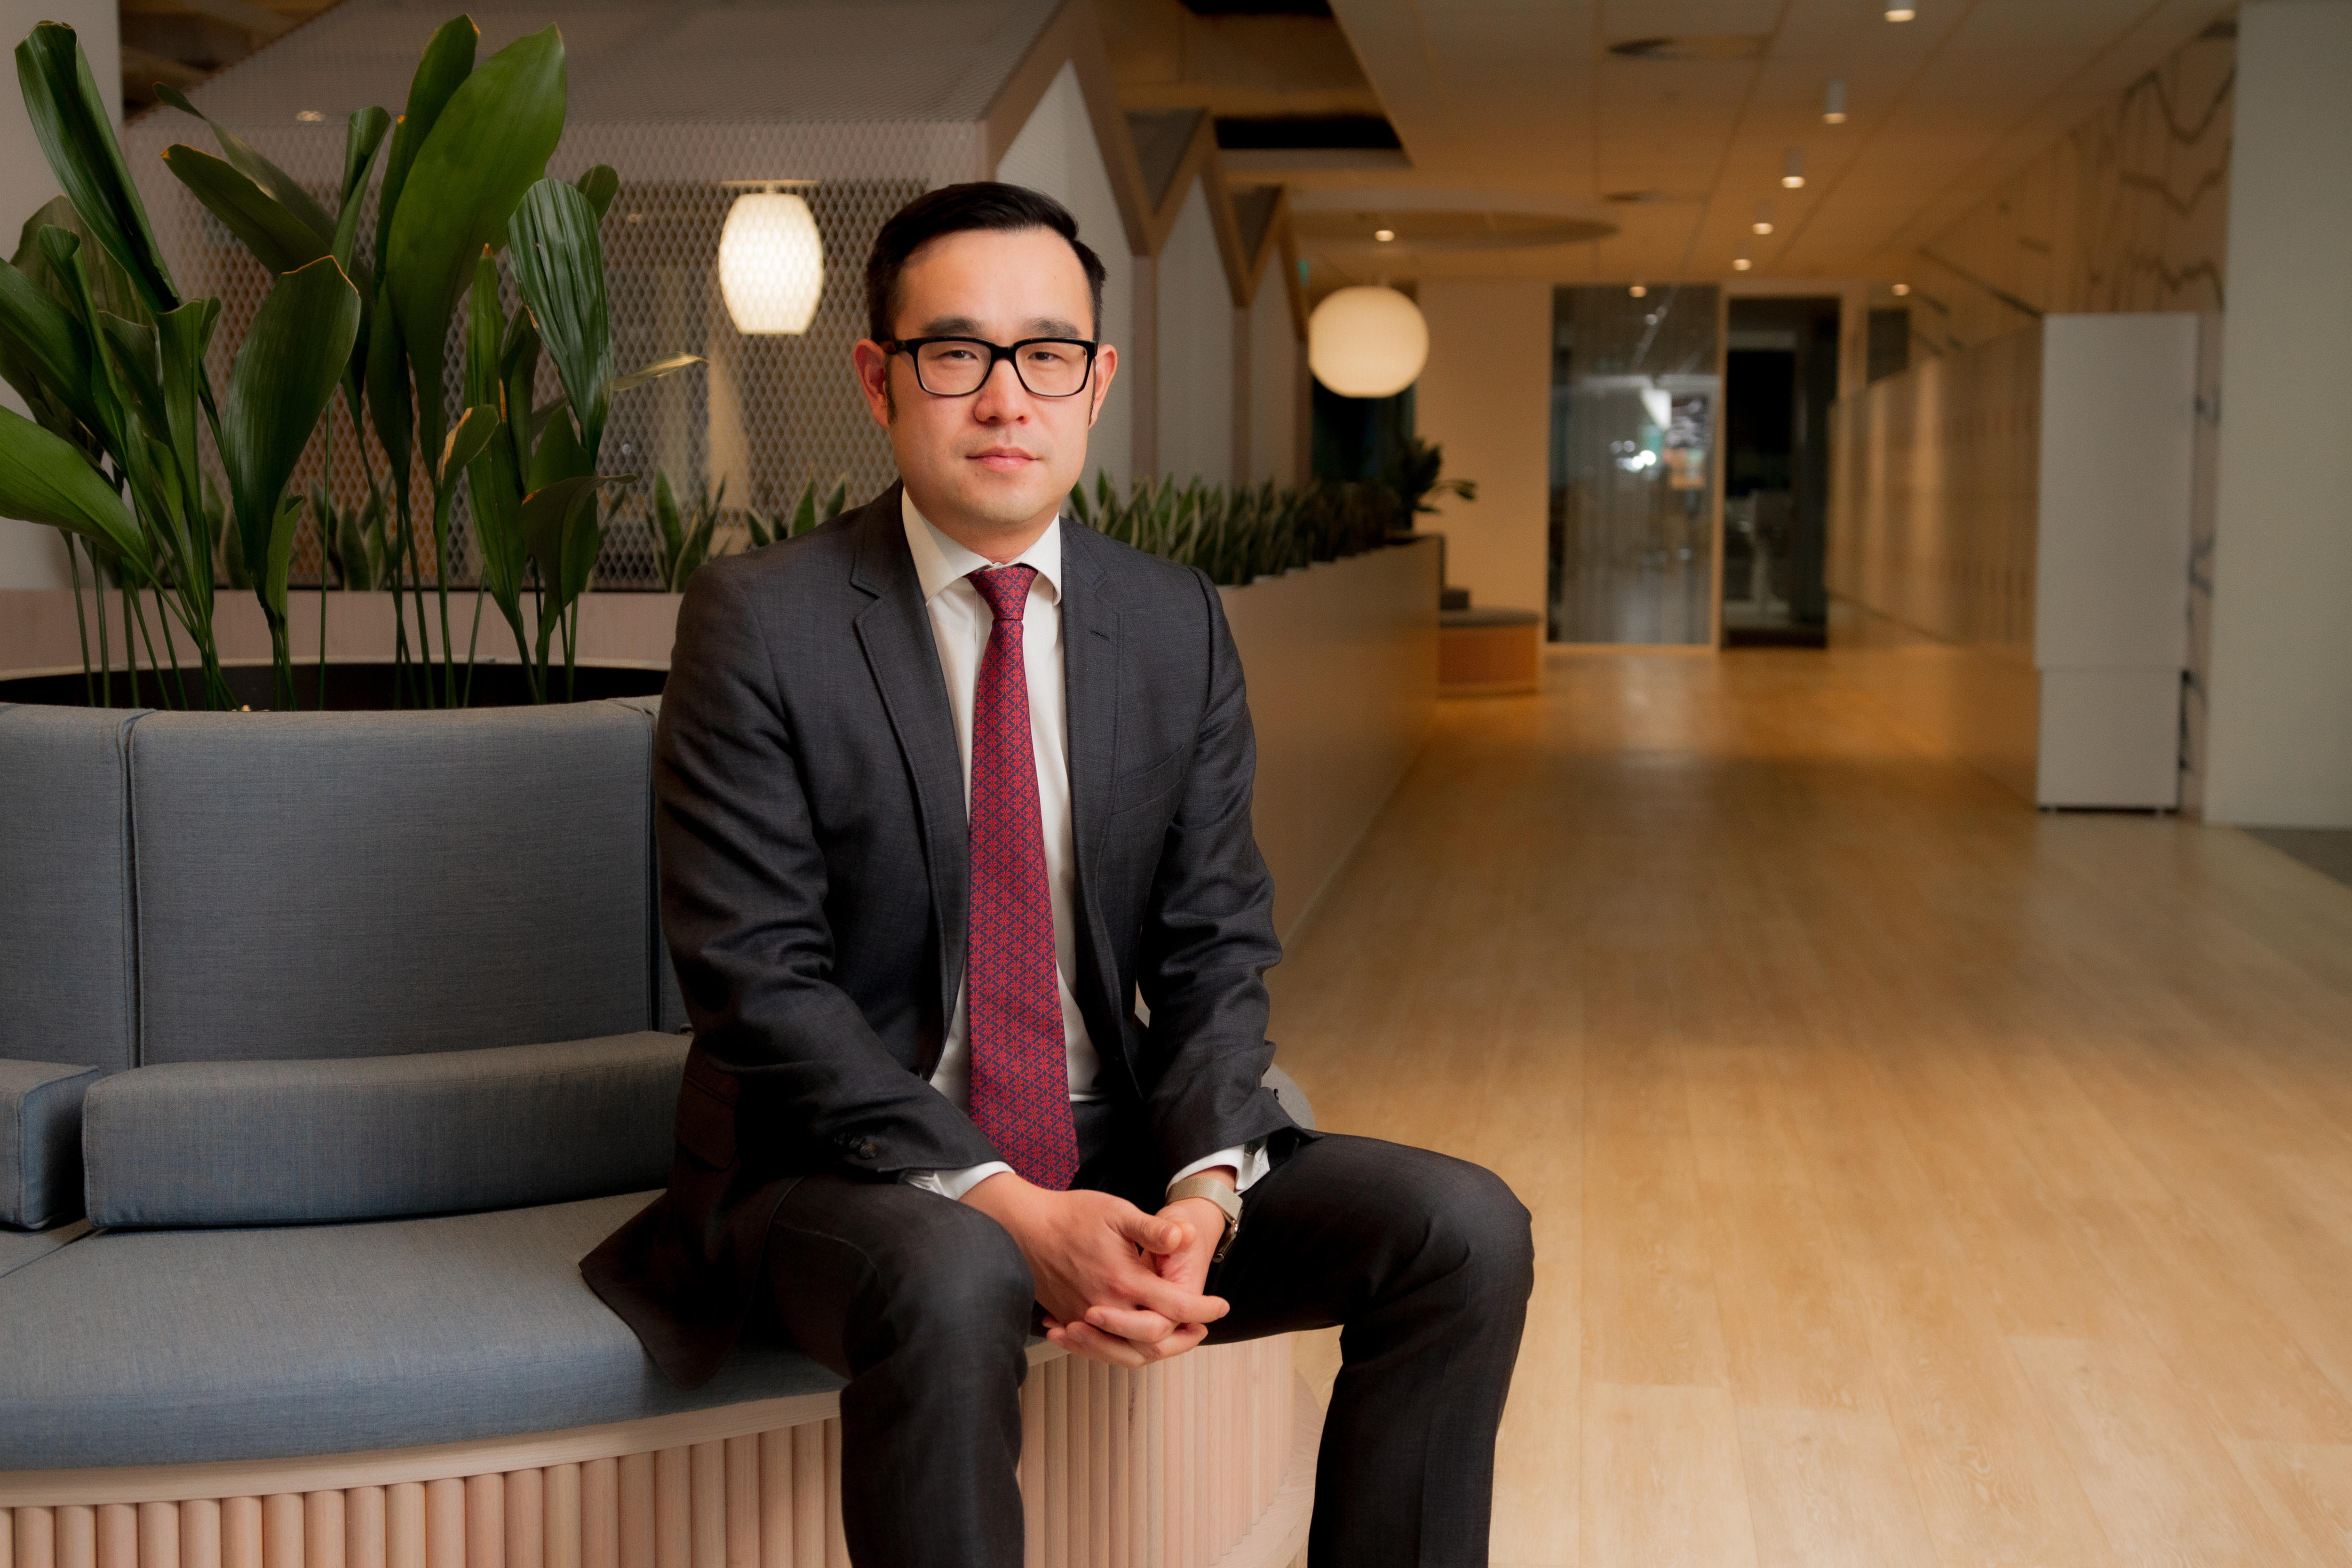 A bespectacled man with short, dark hair wears a dark suit as he sits in an expensive-looking corporate lobby.